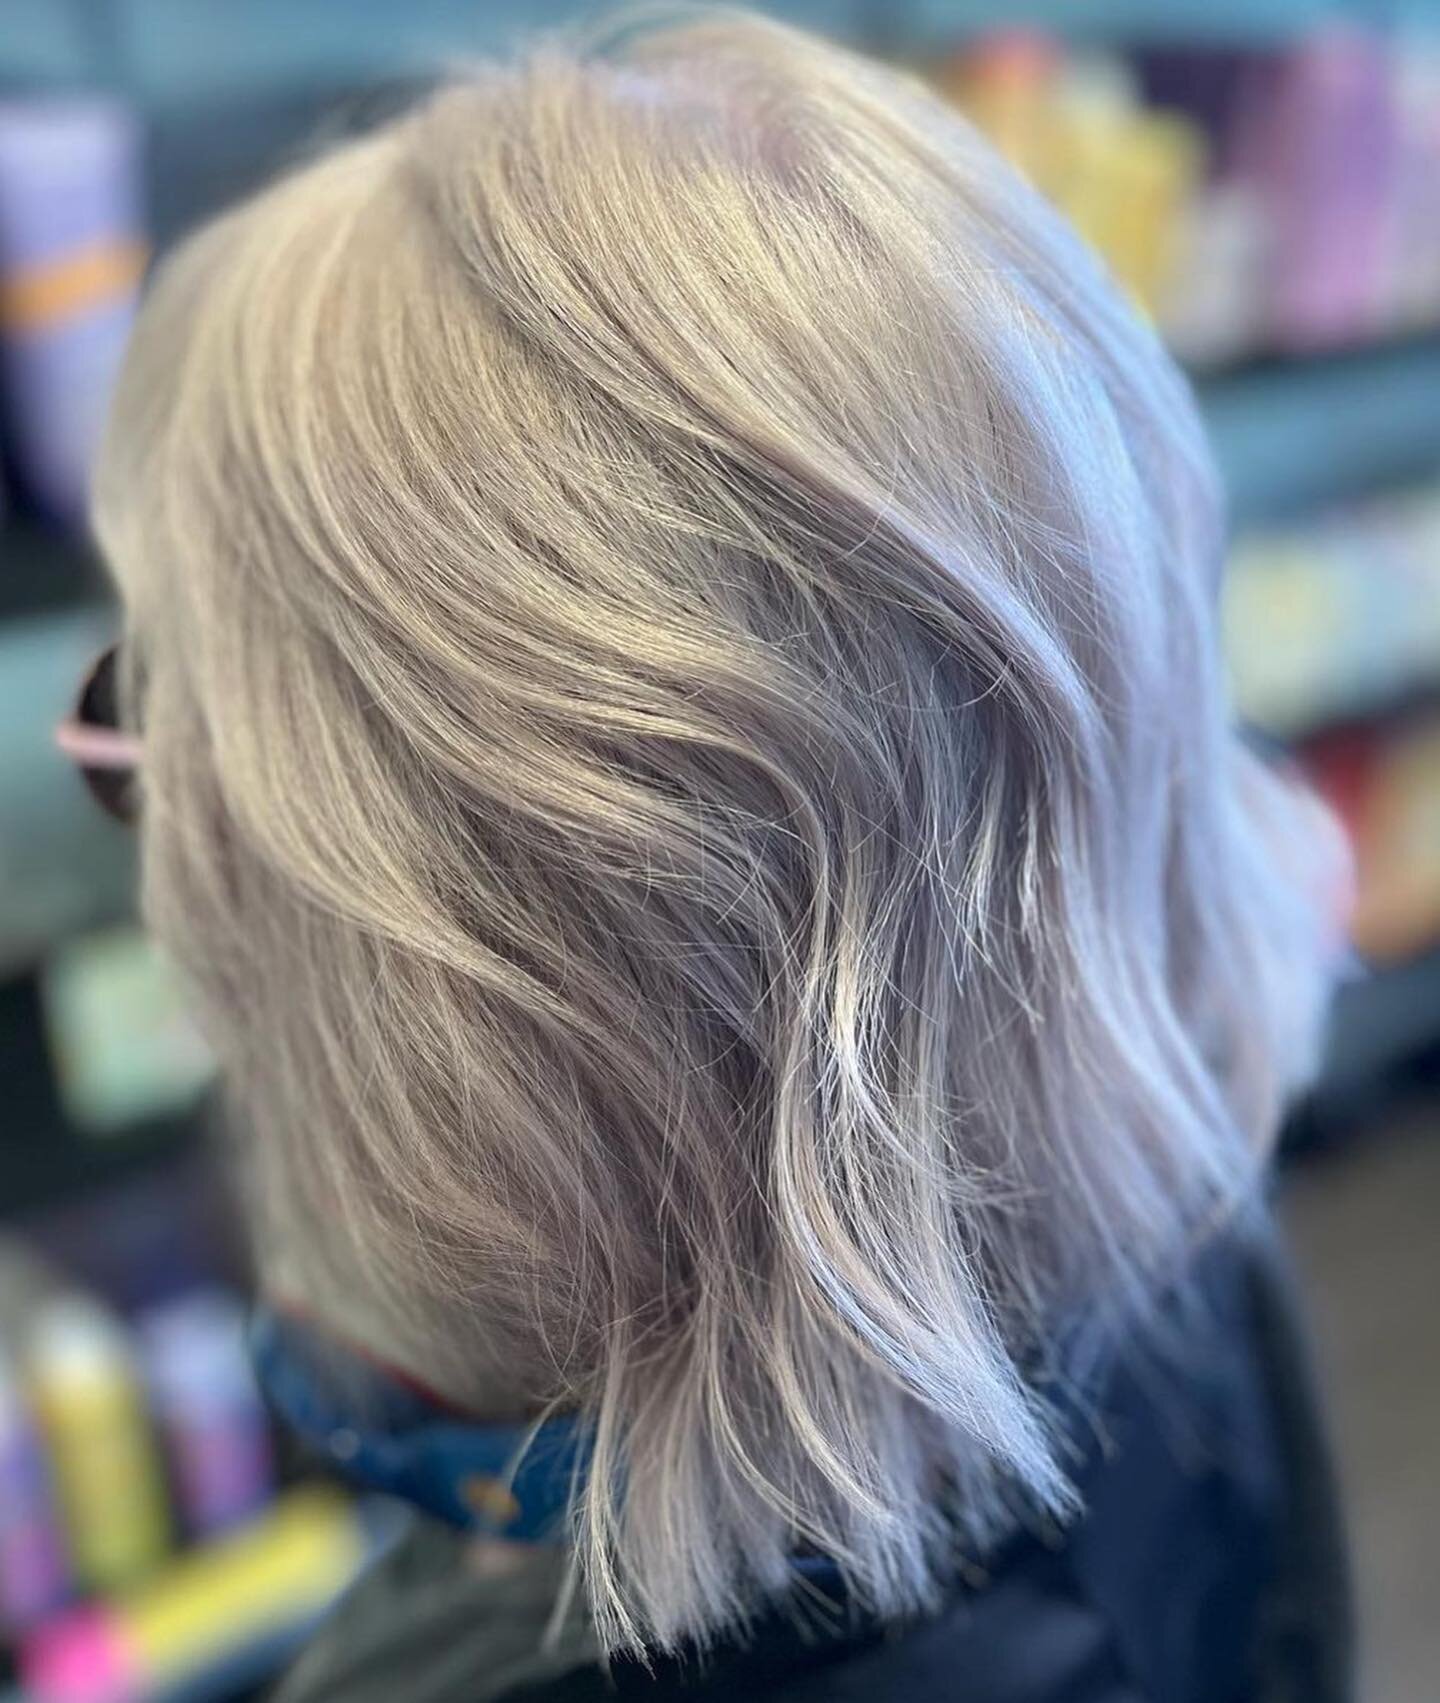 The same color in four different lights. This client gets a root touch up no joke, every 5 weeks, it takes a lot of time and effort to go this blonde and KEEP it.💛
&bull;
&bull;
&bull;
&bull;
&bull;
&bull;
#blonde #blondehair #platinumblonde #chicag